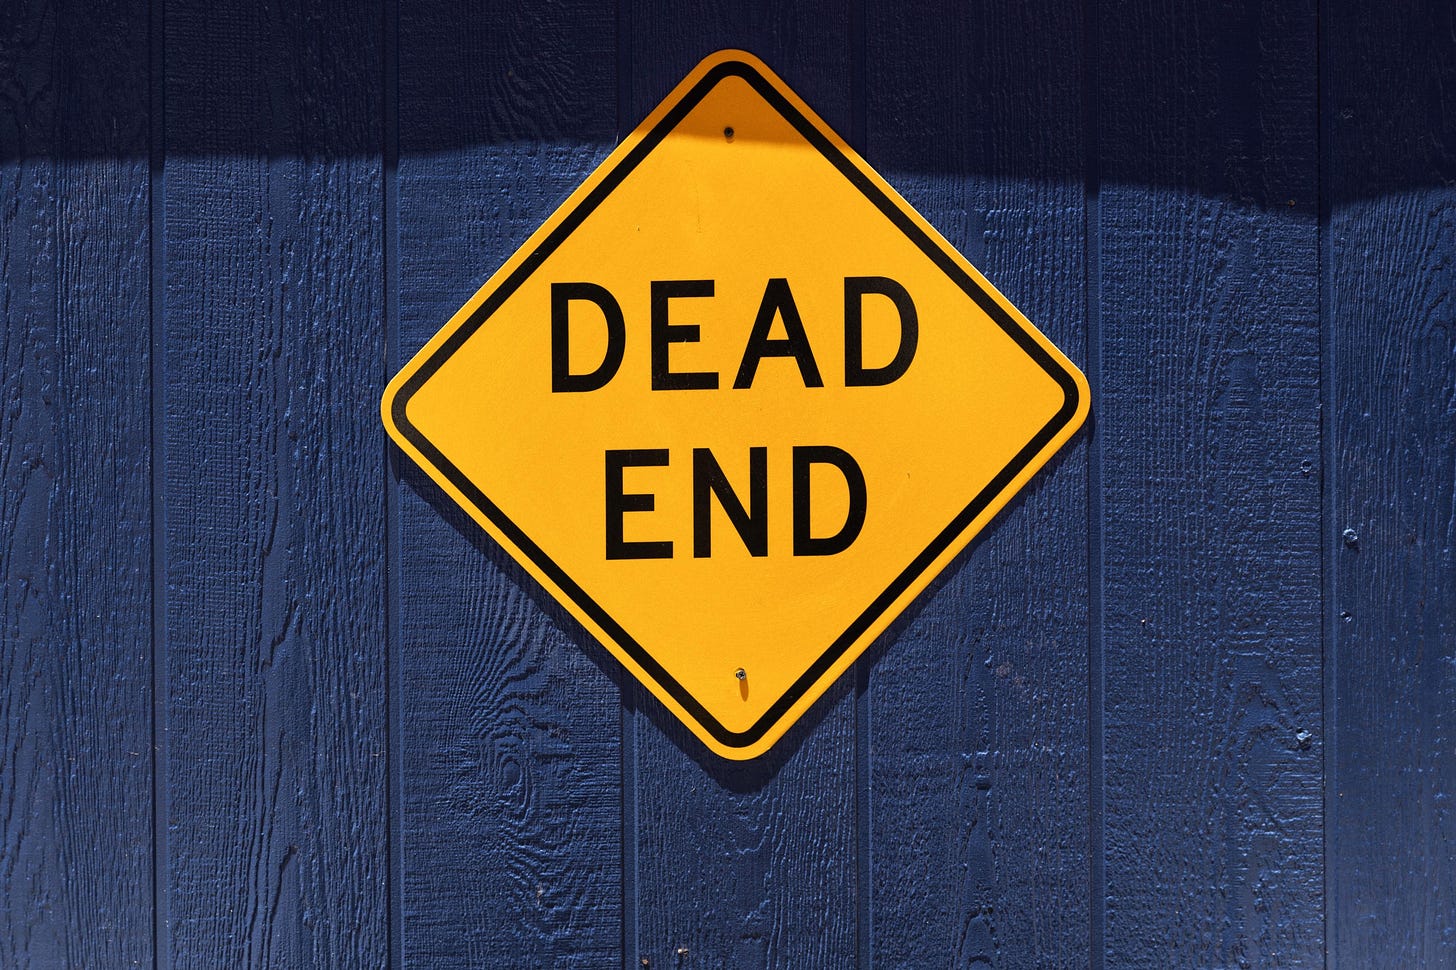 Image of a yellow sign that says “ead end” mounted on a blue wall, for article by Larry G. Maguire